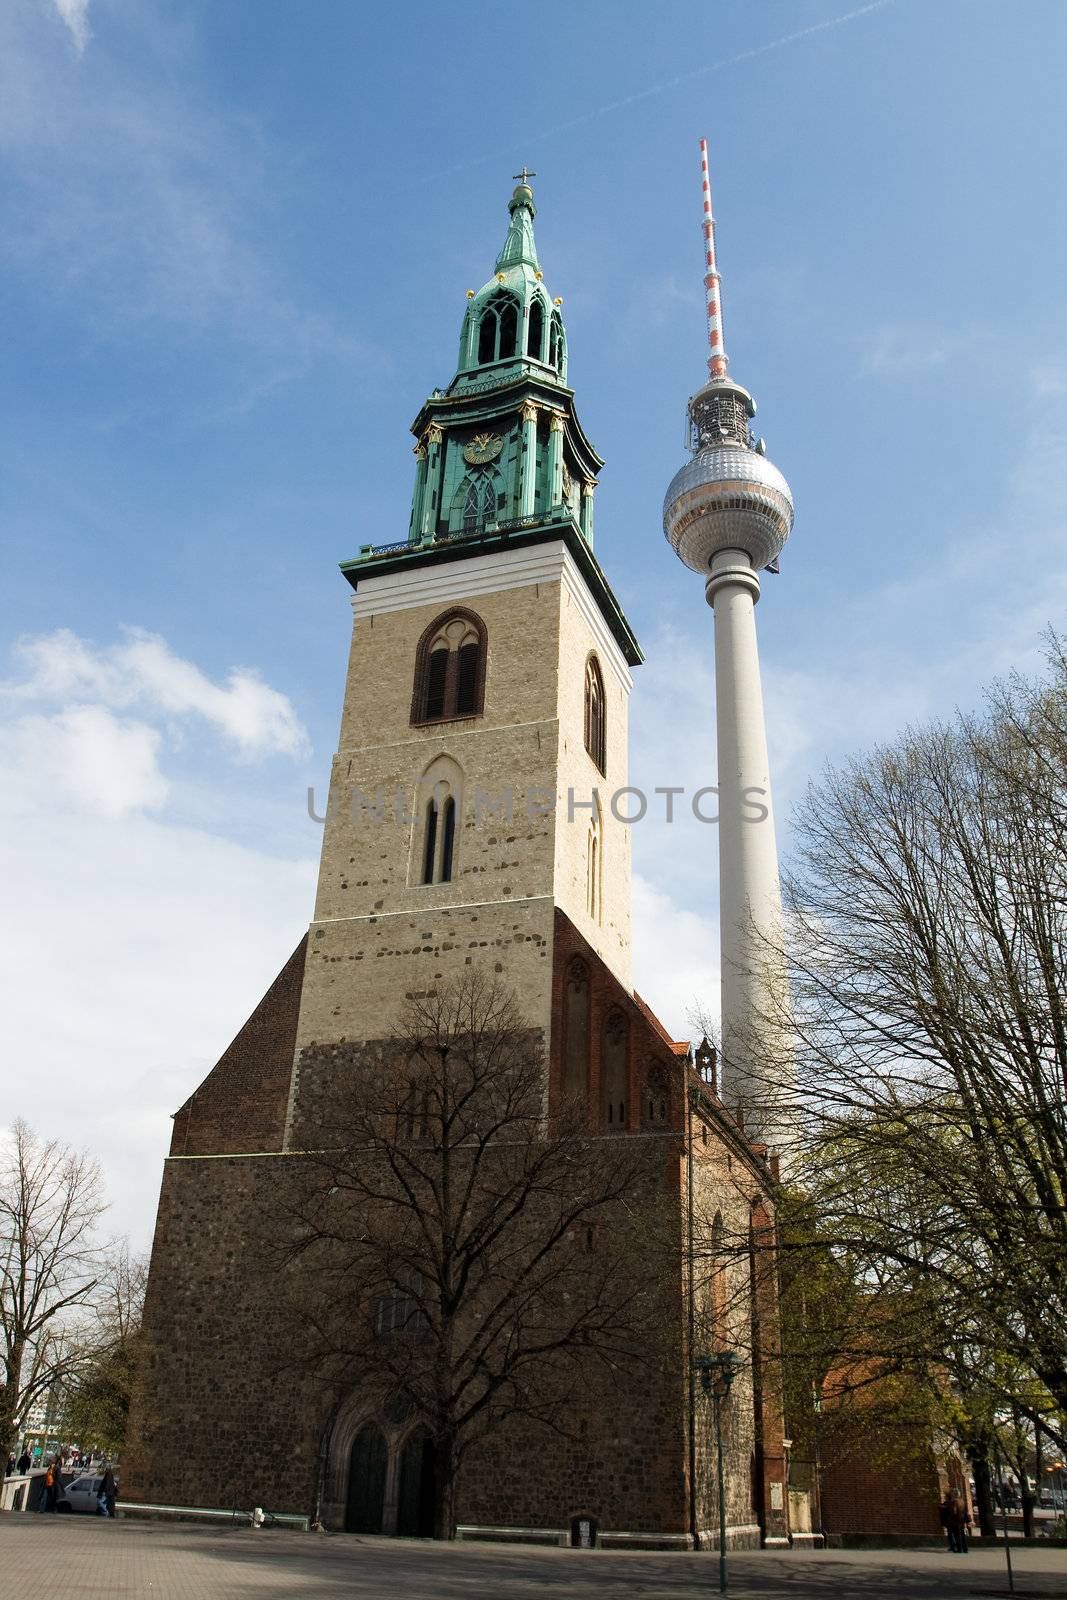 Berlin TV tower and Church by ints